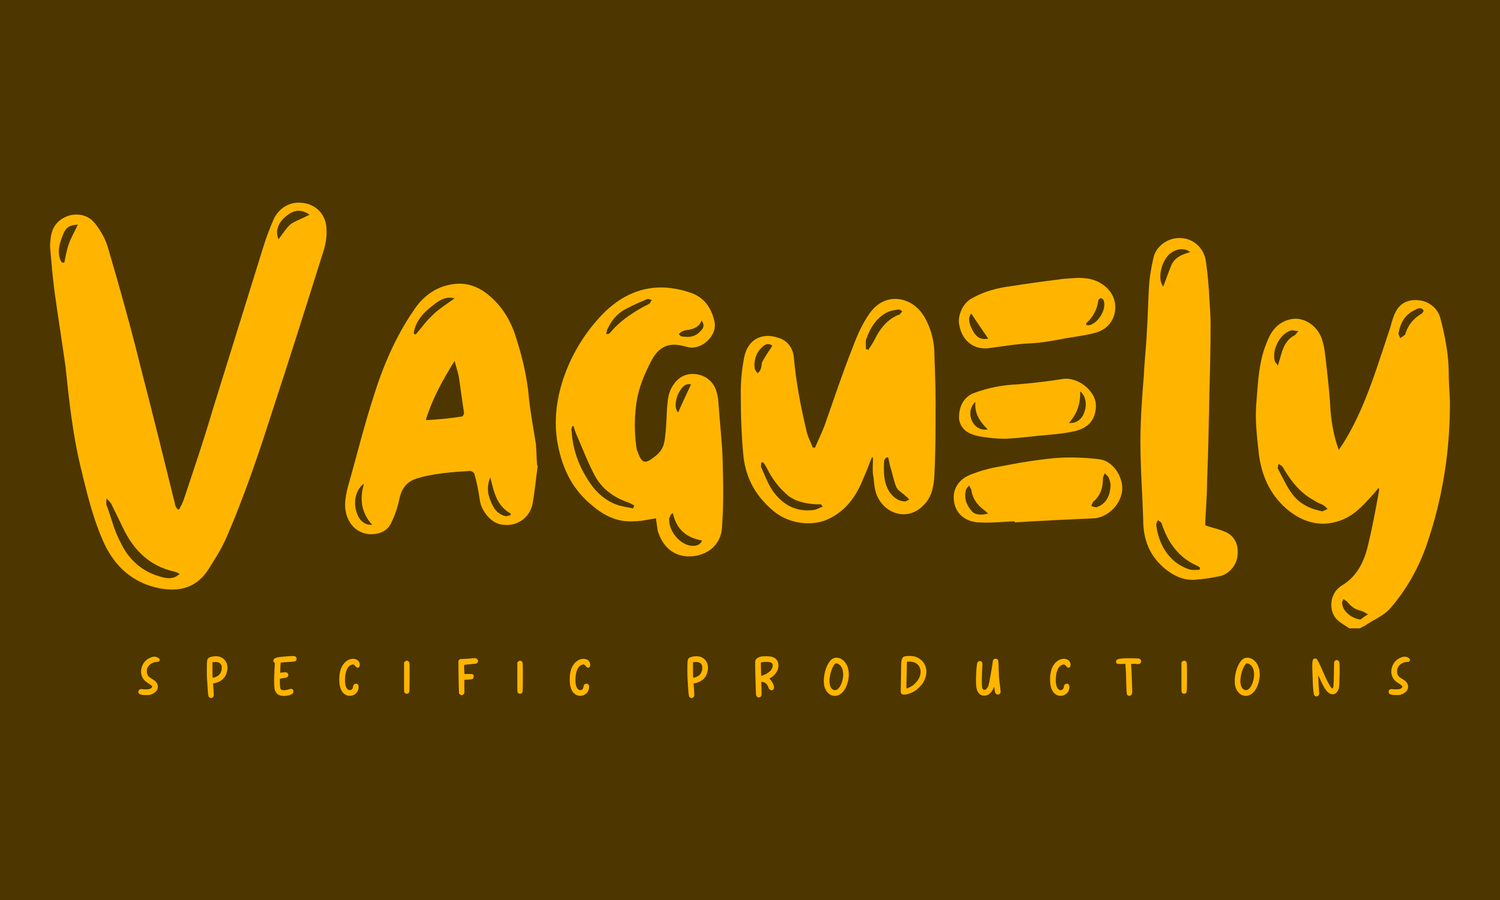 Vaguely Specific Productions